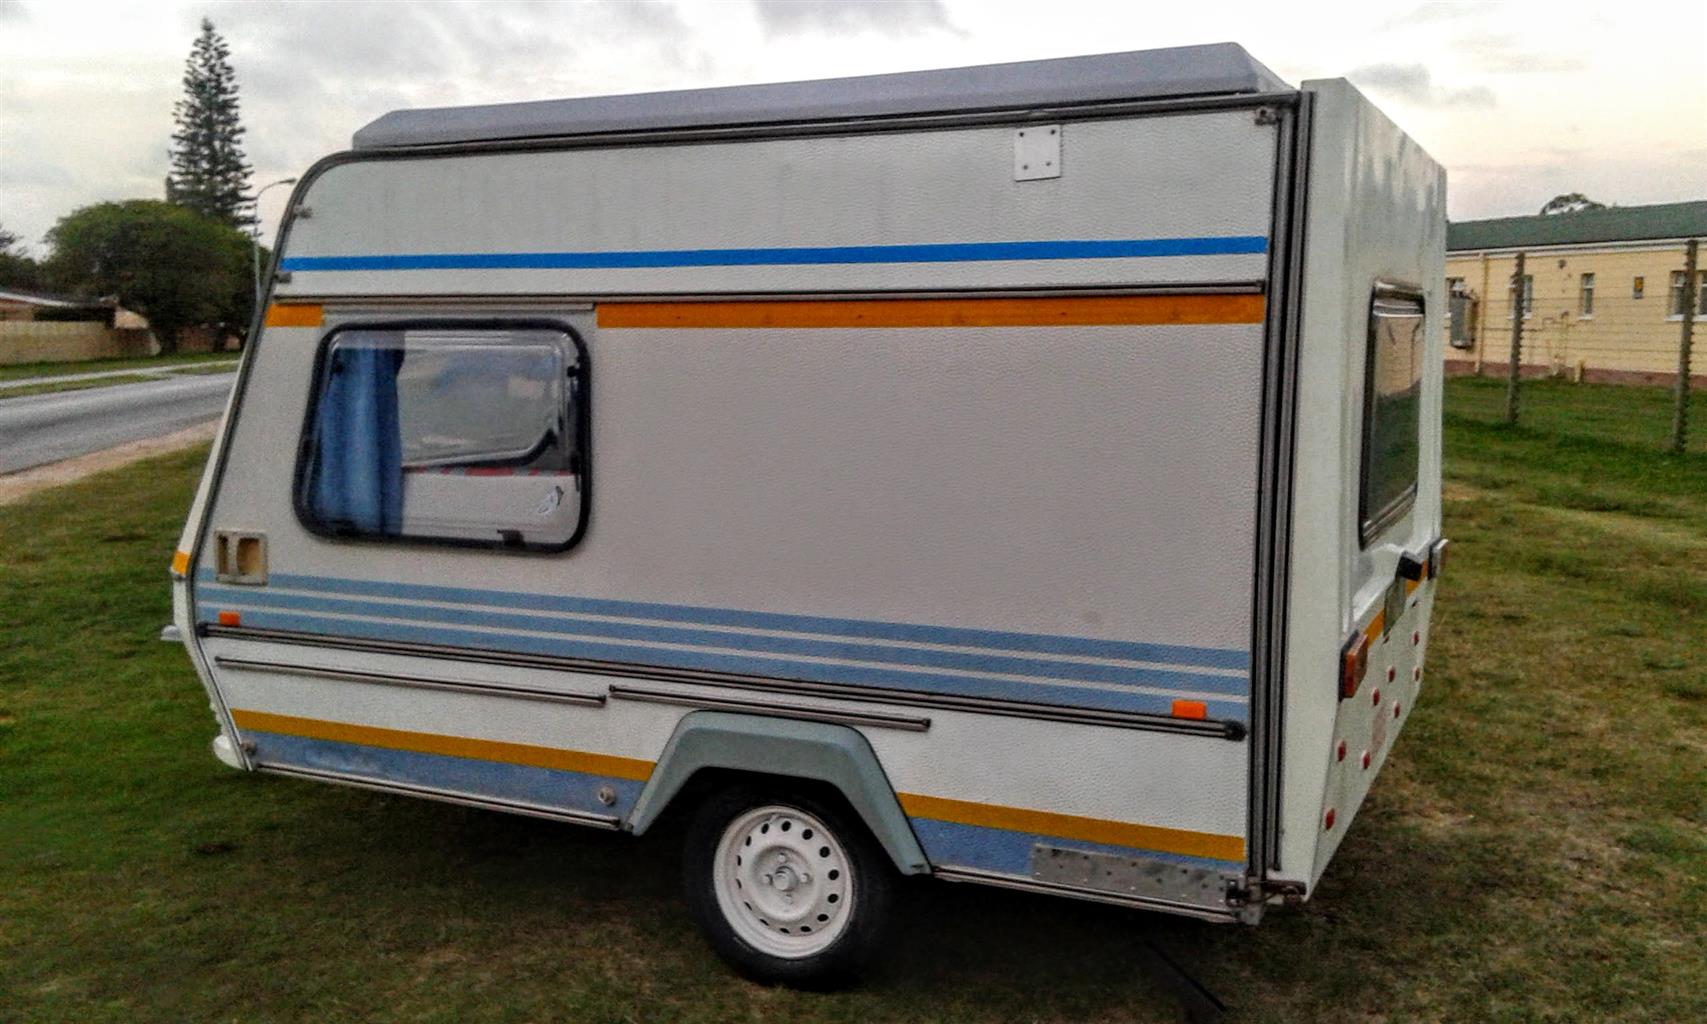 Caravan/ motorhome wanted with or without papers accident/ water damaged for cash call michele on whtt up 0653691335